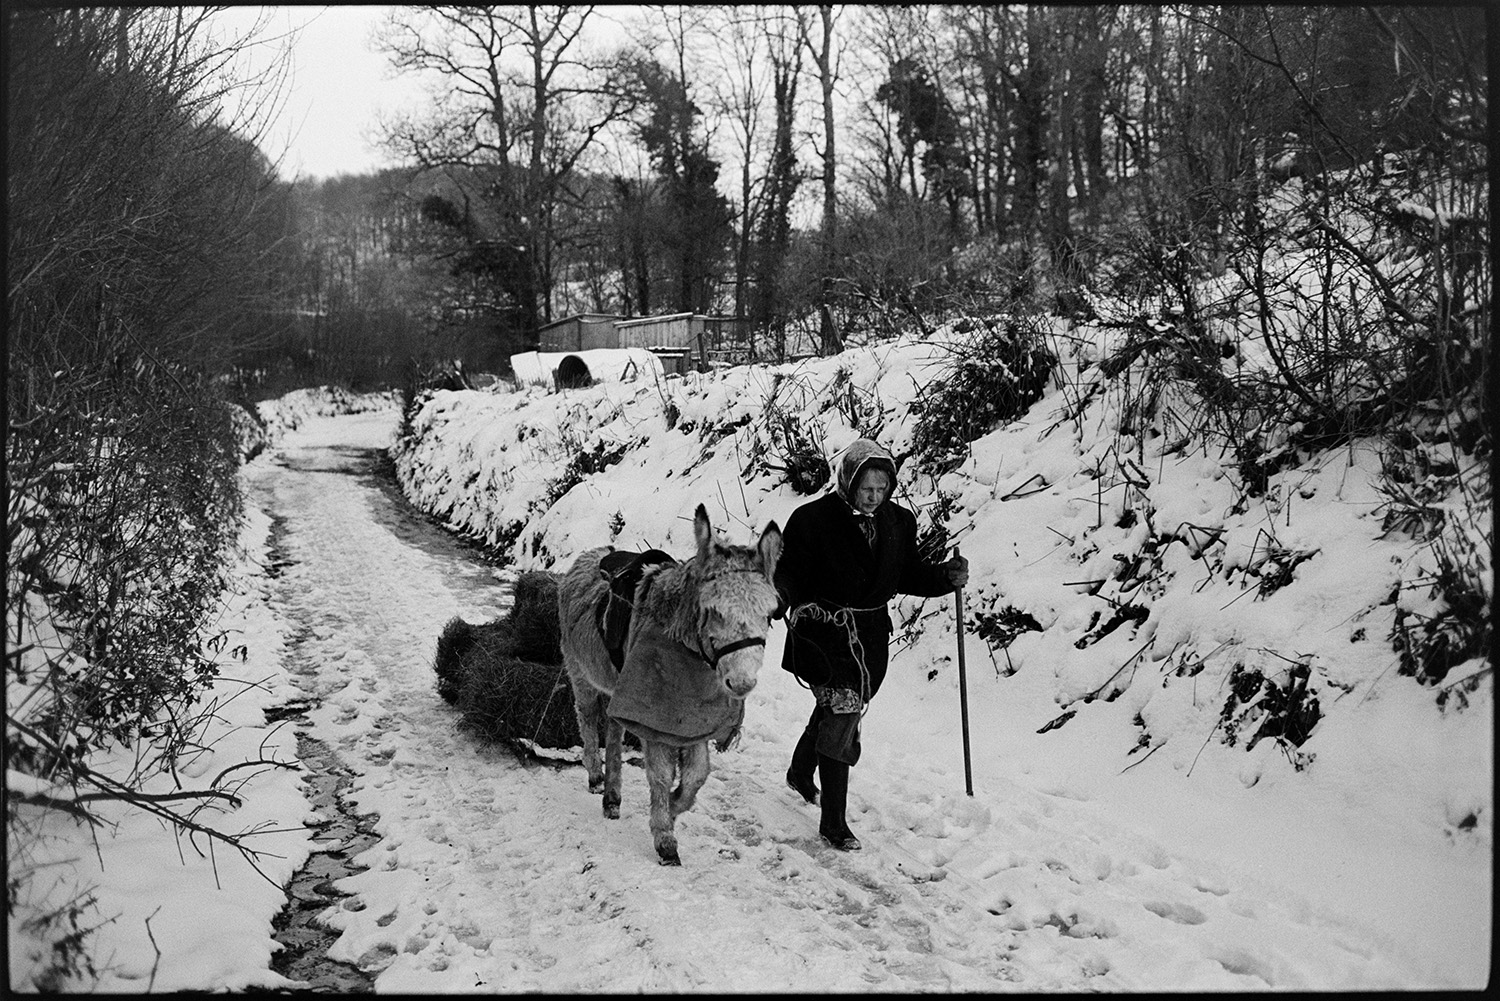 Snow, woman with donkey pulling hay on sledge down snowy lane. 
[Jo Curzon leading a donkey along a snow covered lane at Millhams, Dolton. The donkey is pulling a sledge with hay which they are taking to feed livestock.]